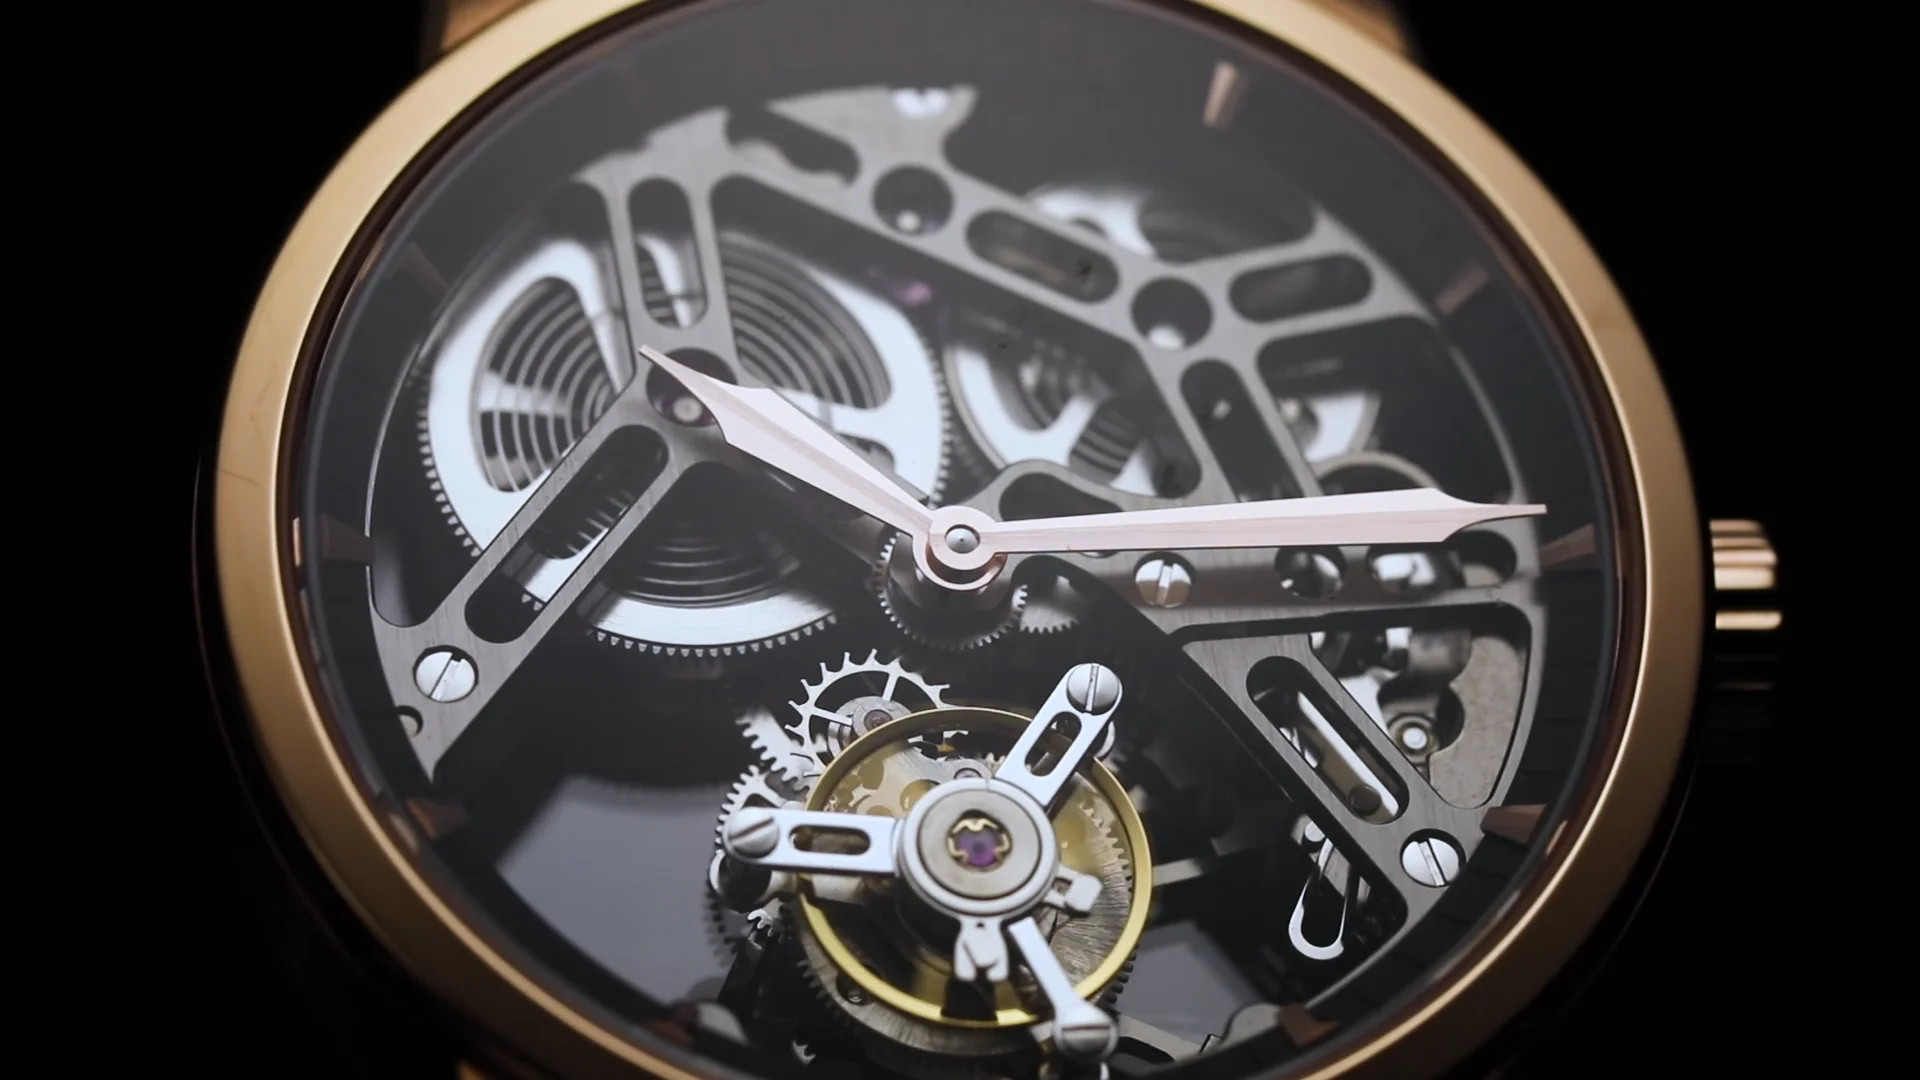 Agelocer - This is a limited edition TOURBILLON WATCh